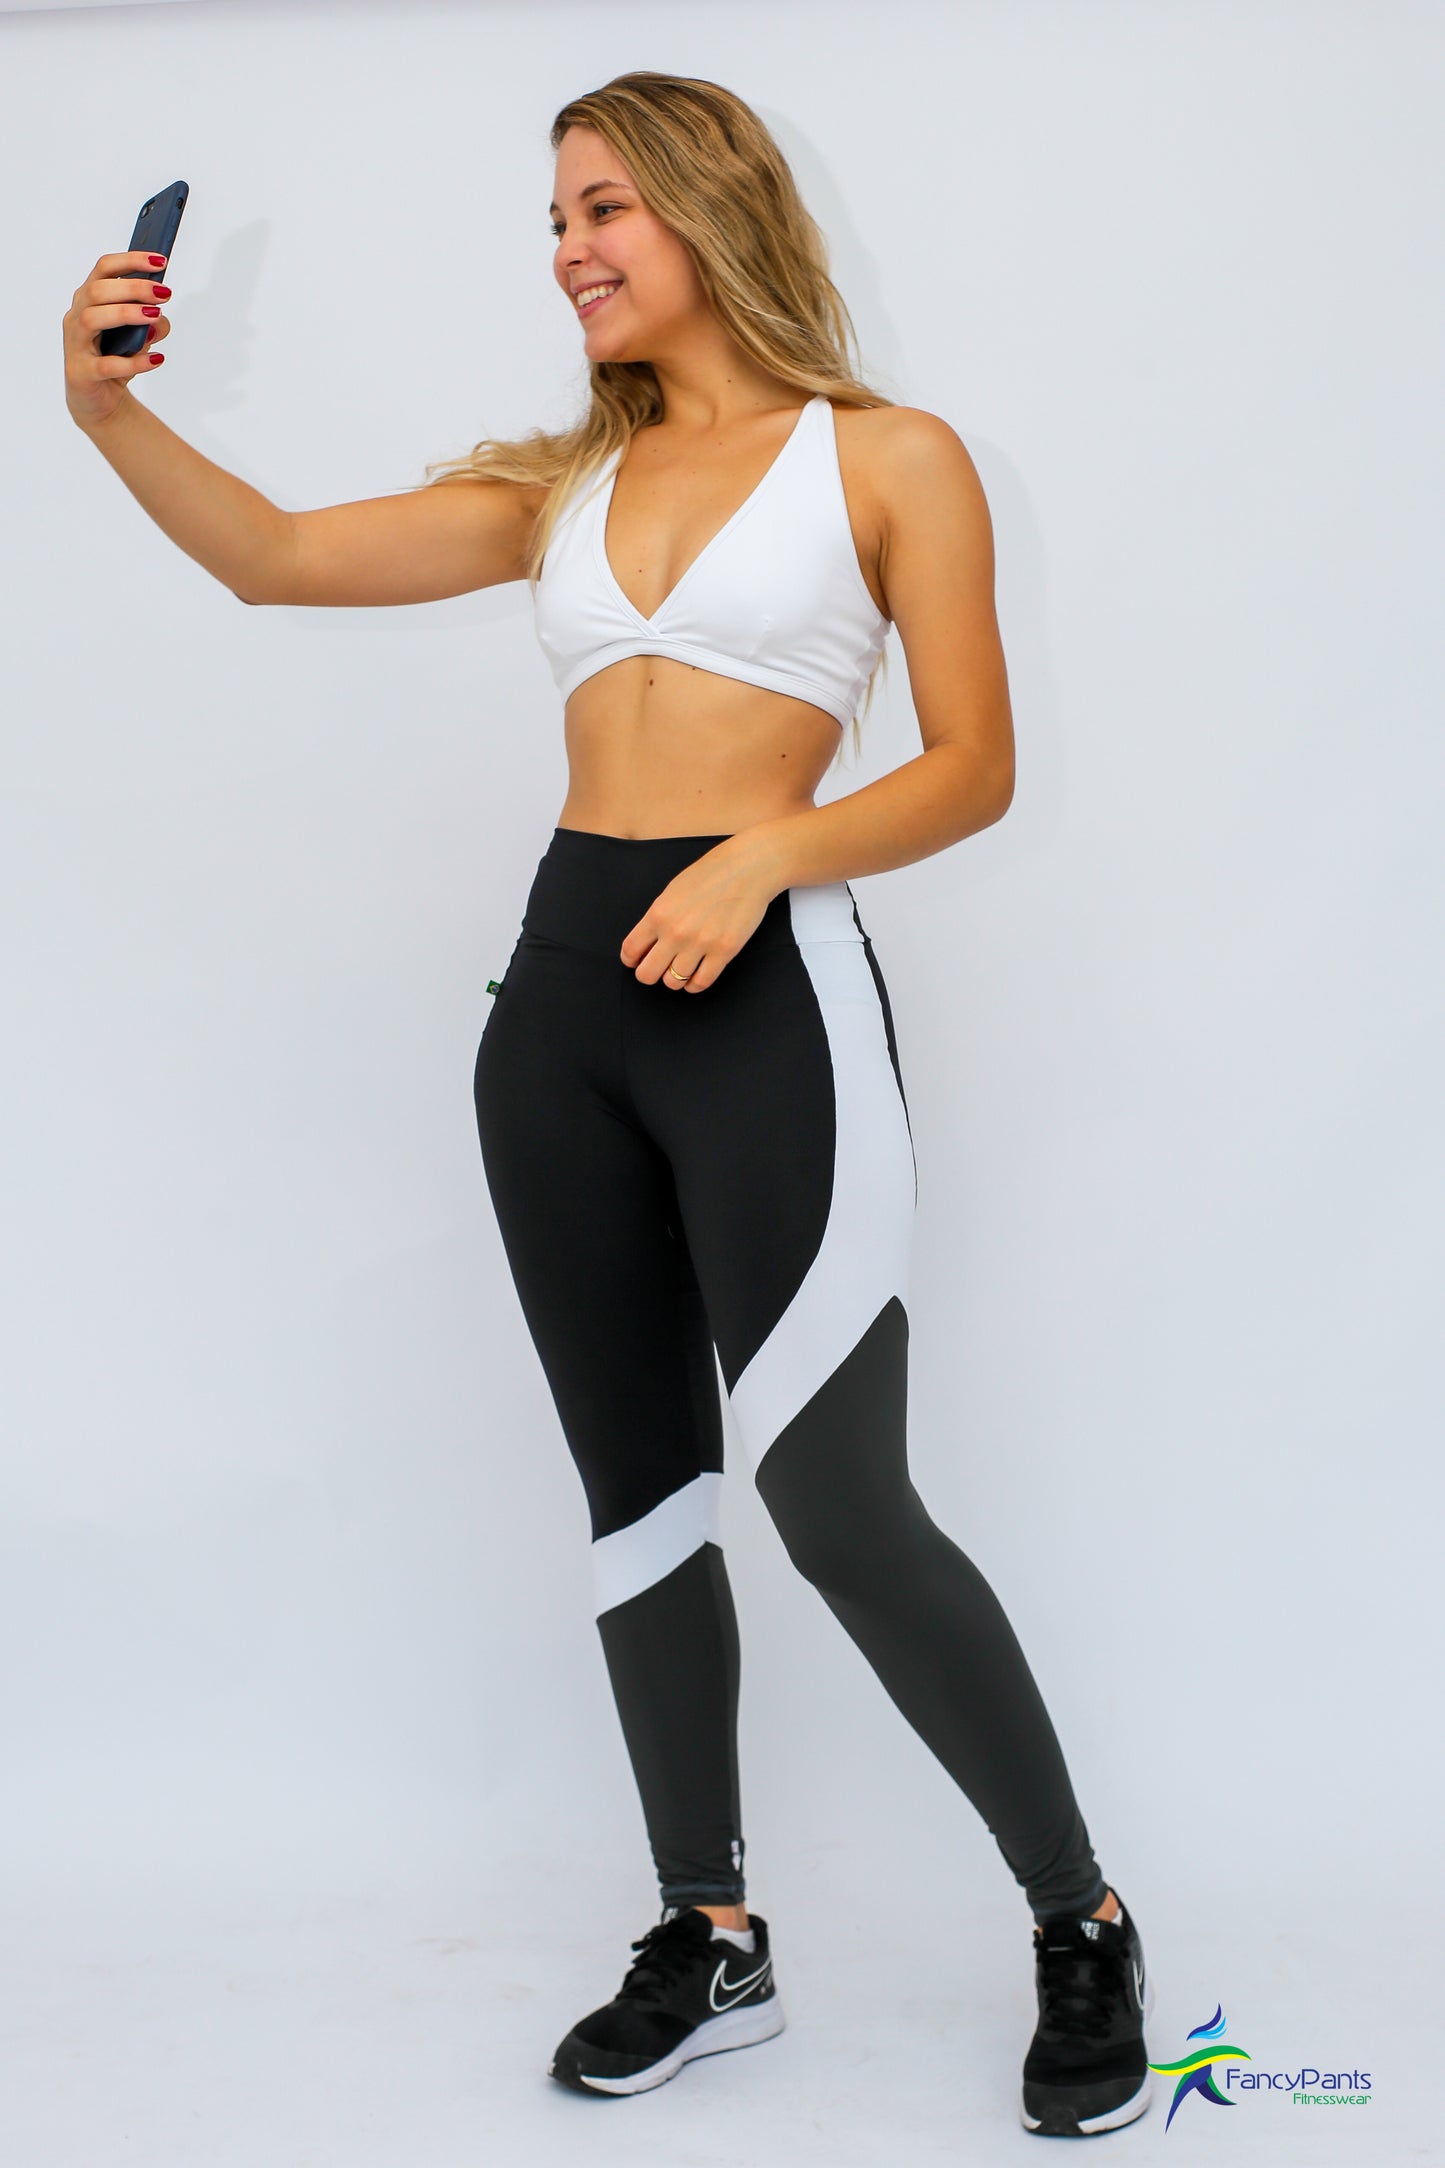 Classic Lines Tri color Leggings with Pocket - black white and gray